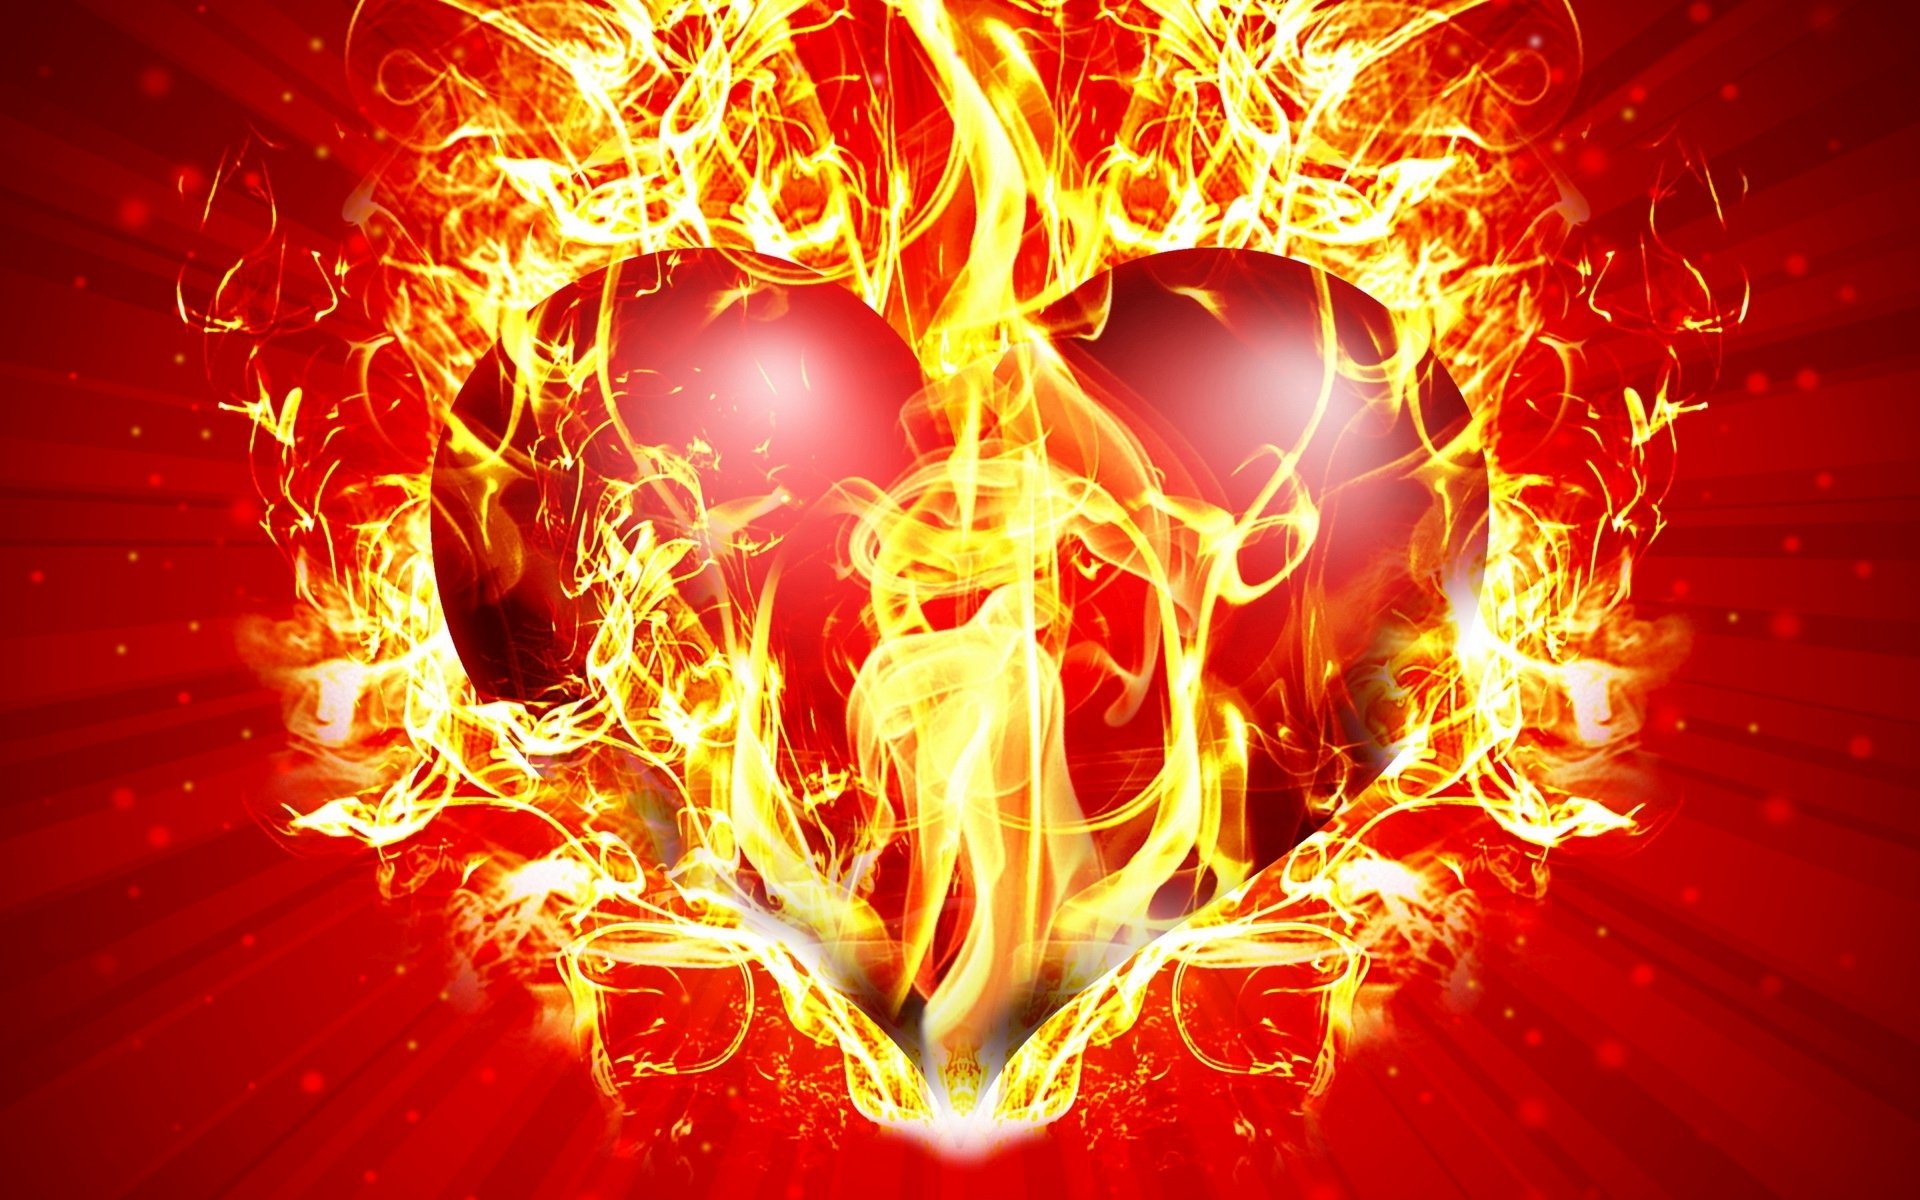 1920x1200 Heart on Fire Wallpaper Background Image. 